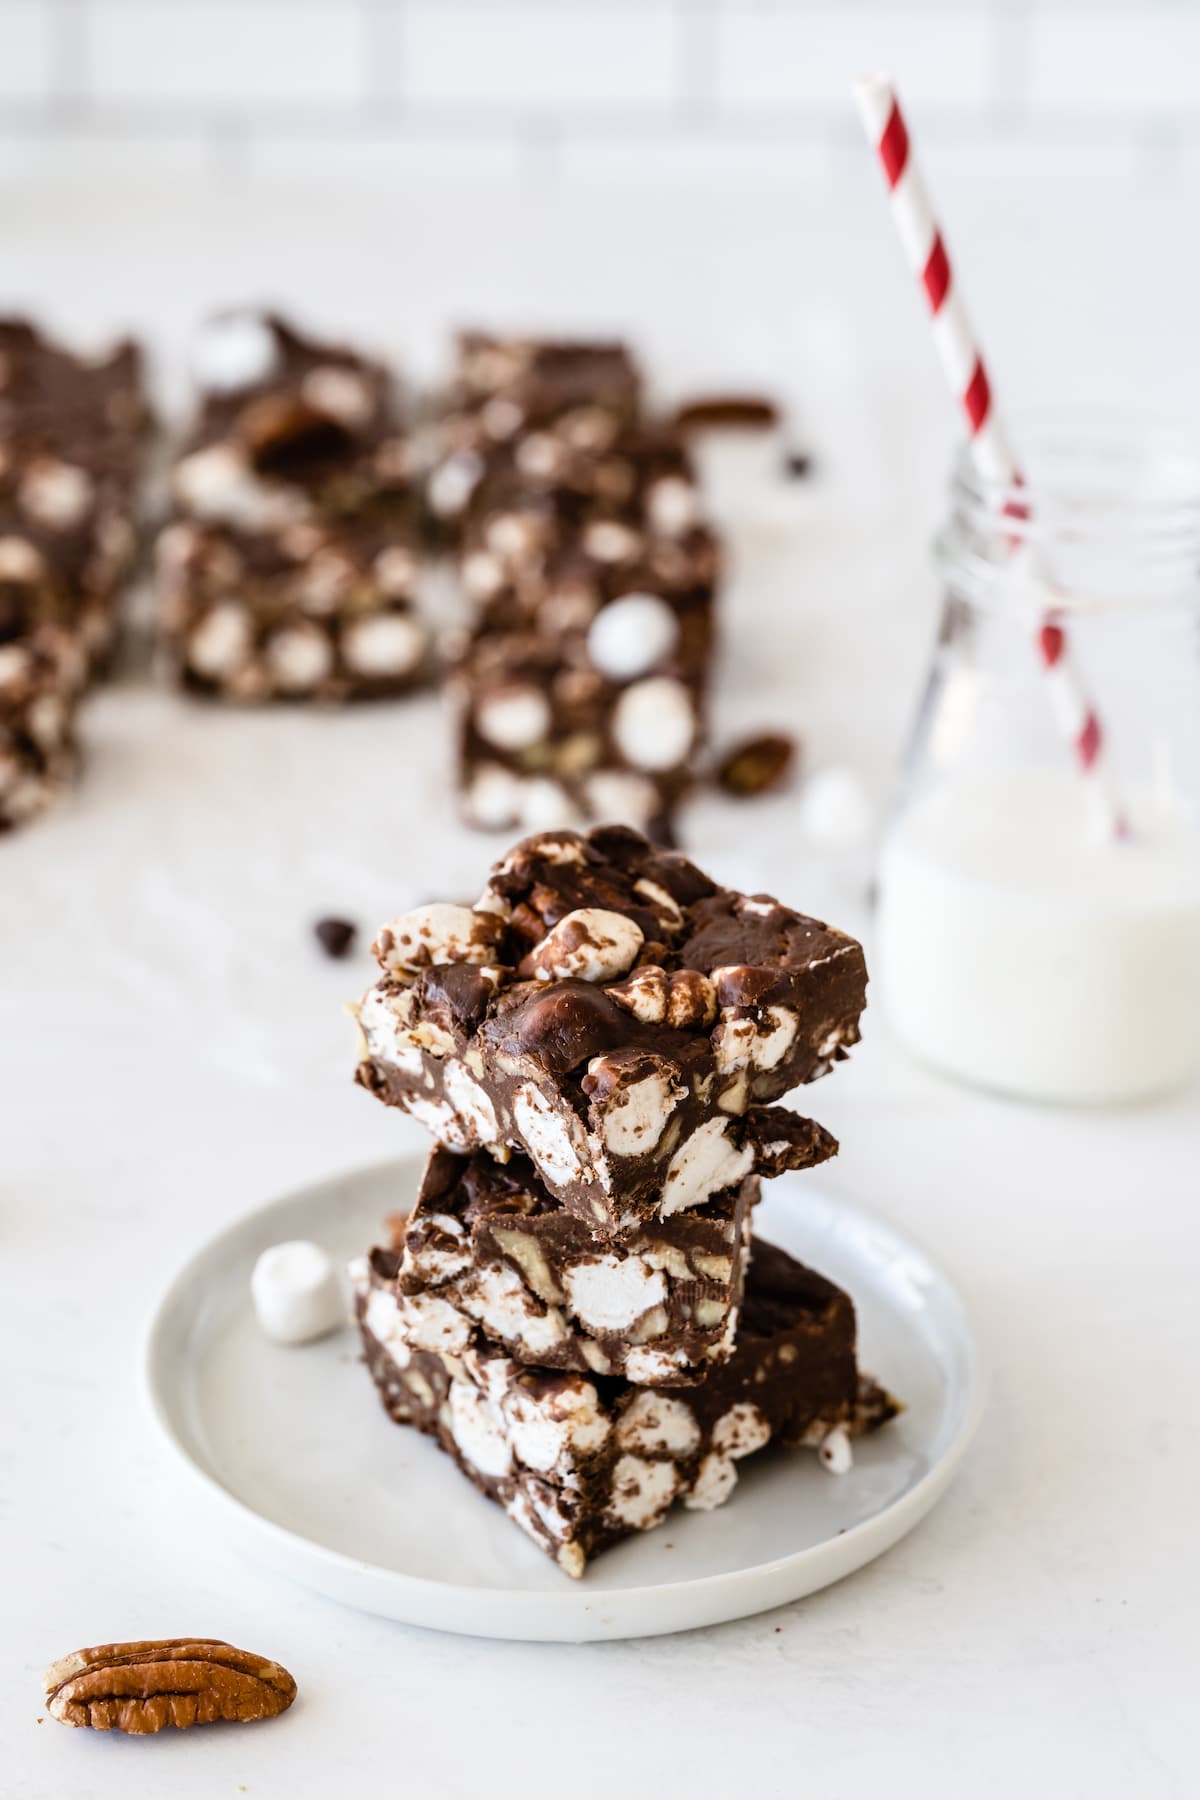 Easy Rocky Road Bars (No Bake Recipe) - Crazy for Crust